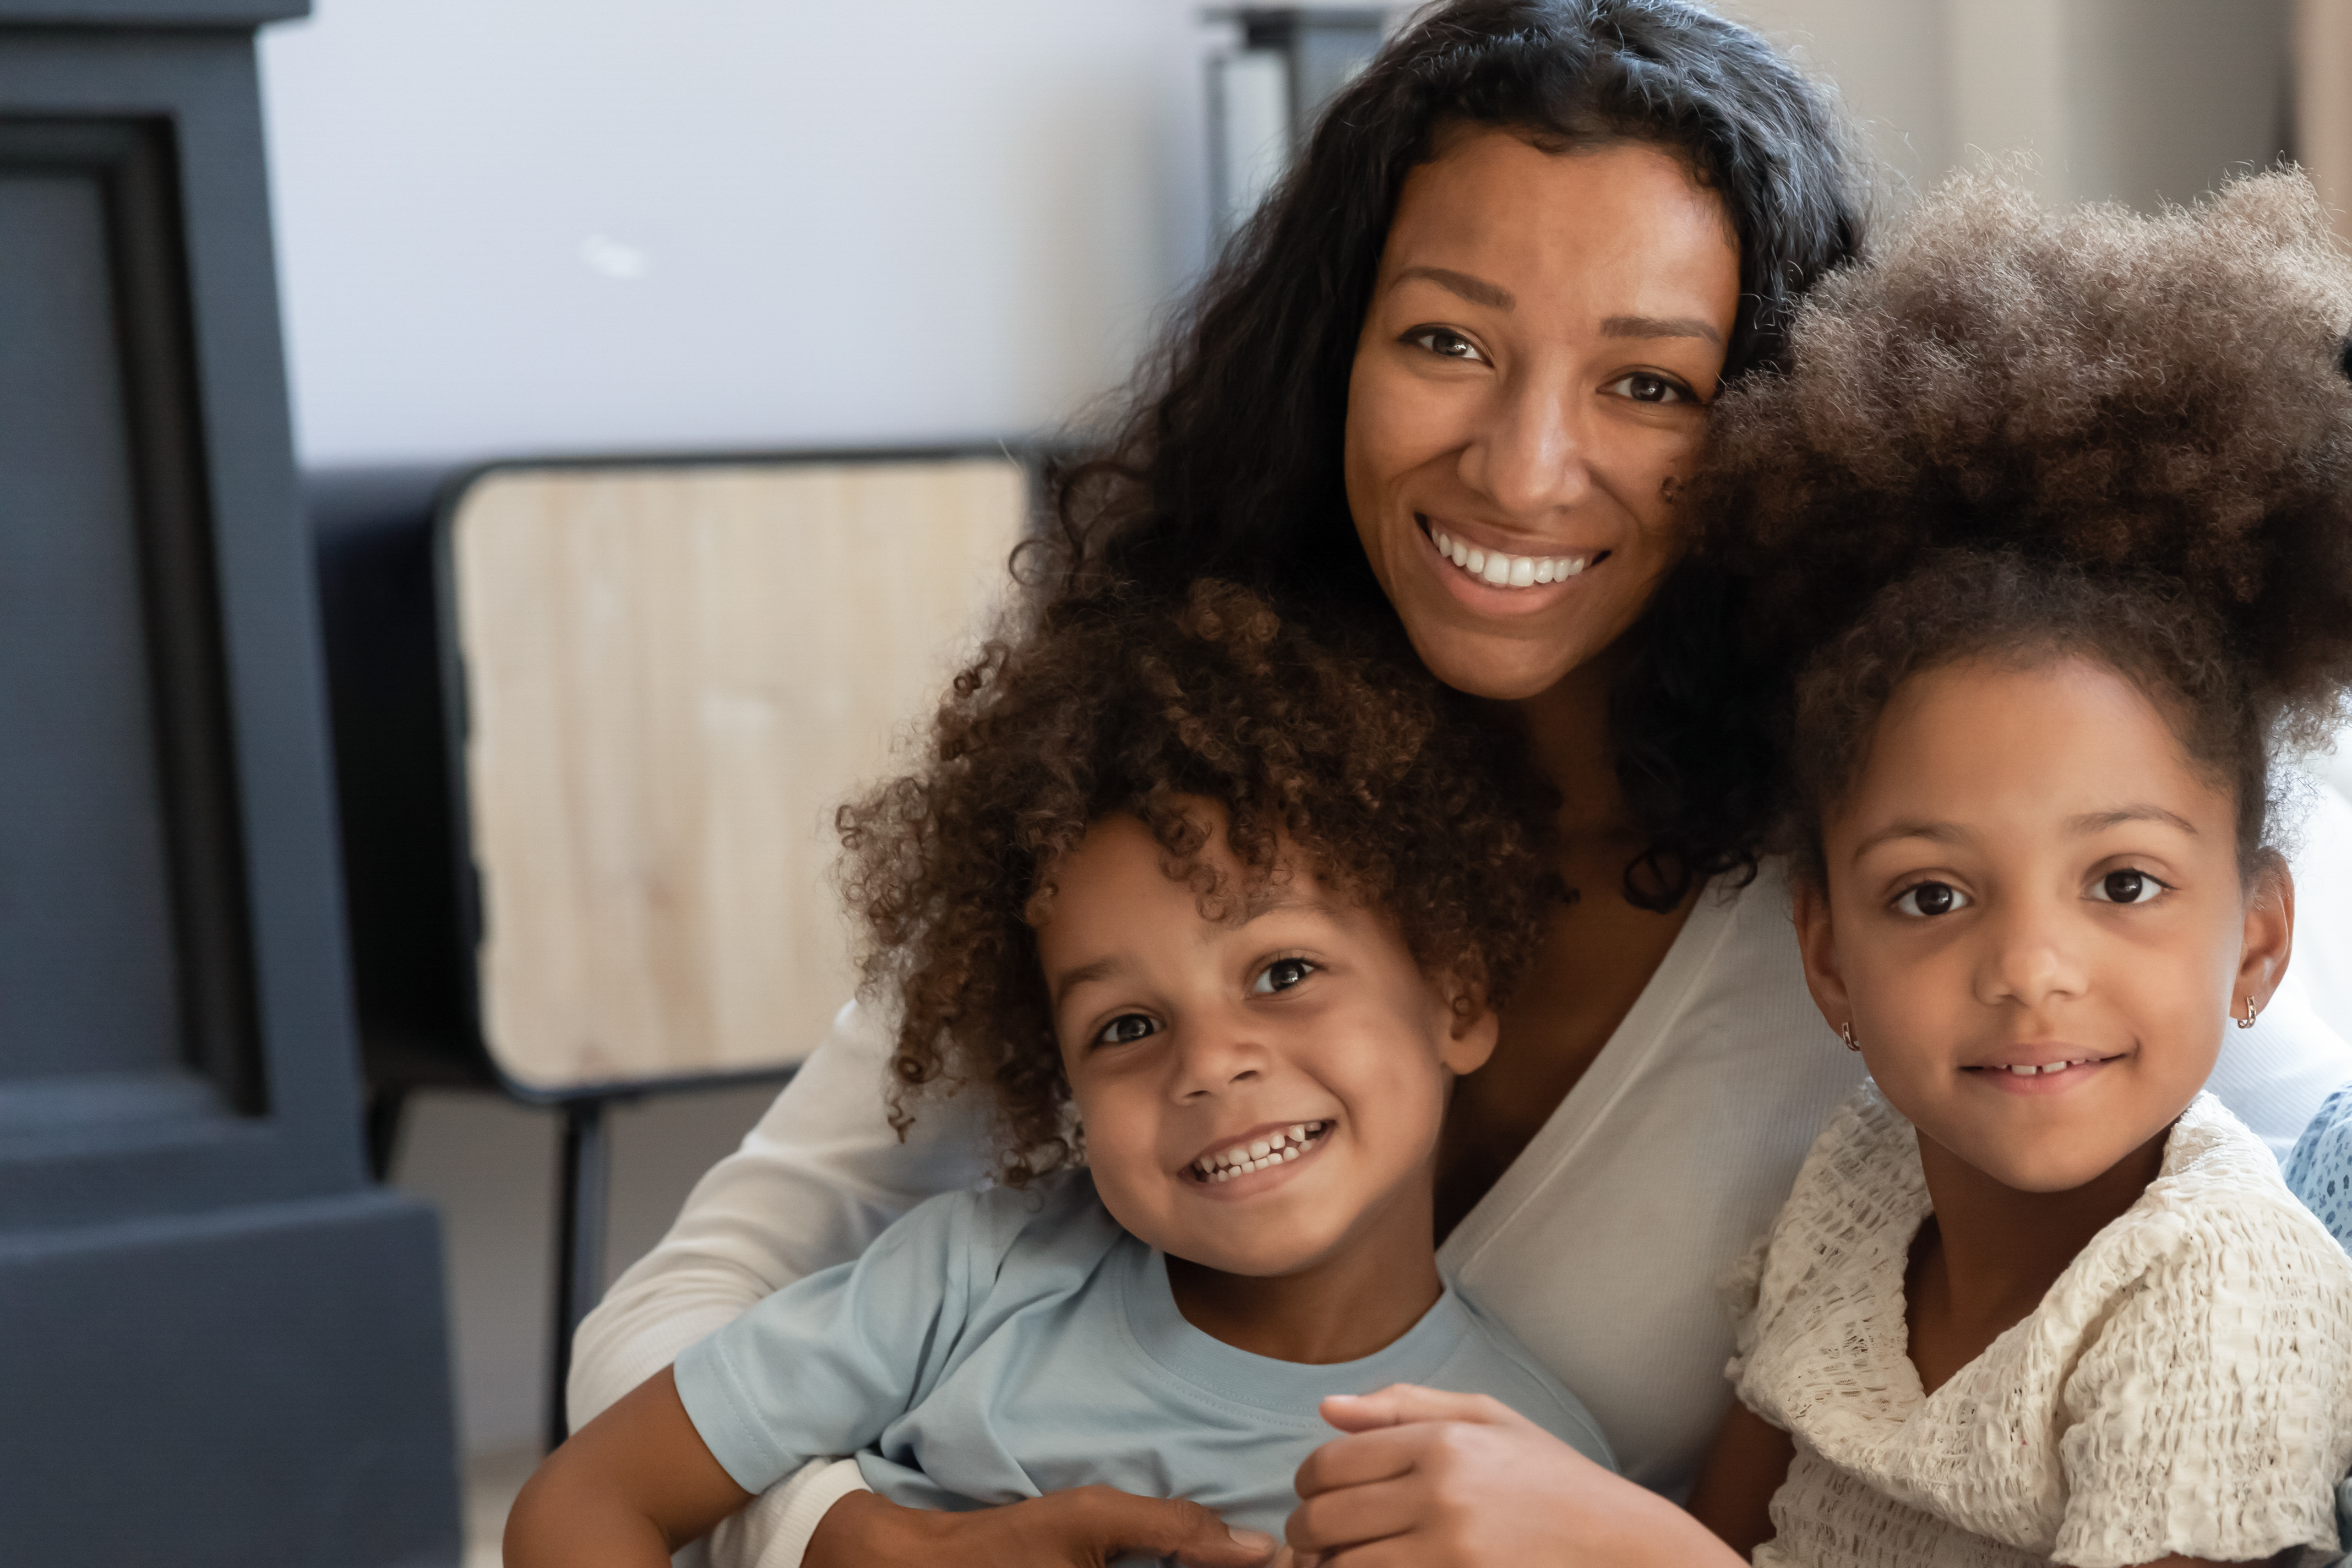 A mother smiling with her daughters | Source: Shutterstock